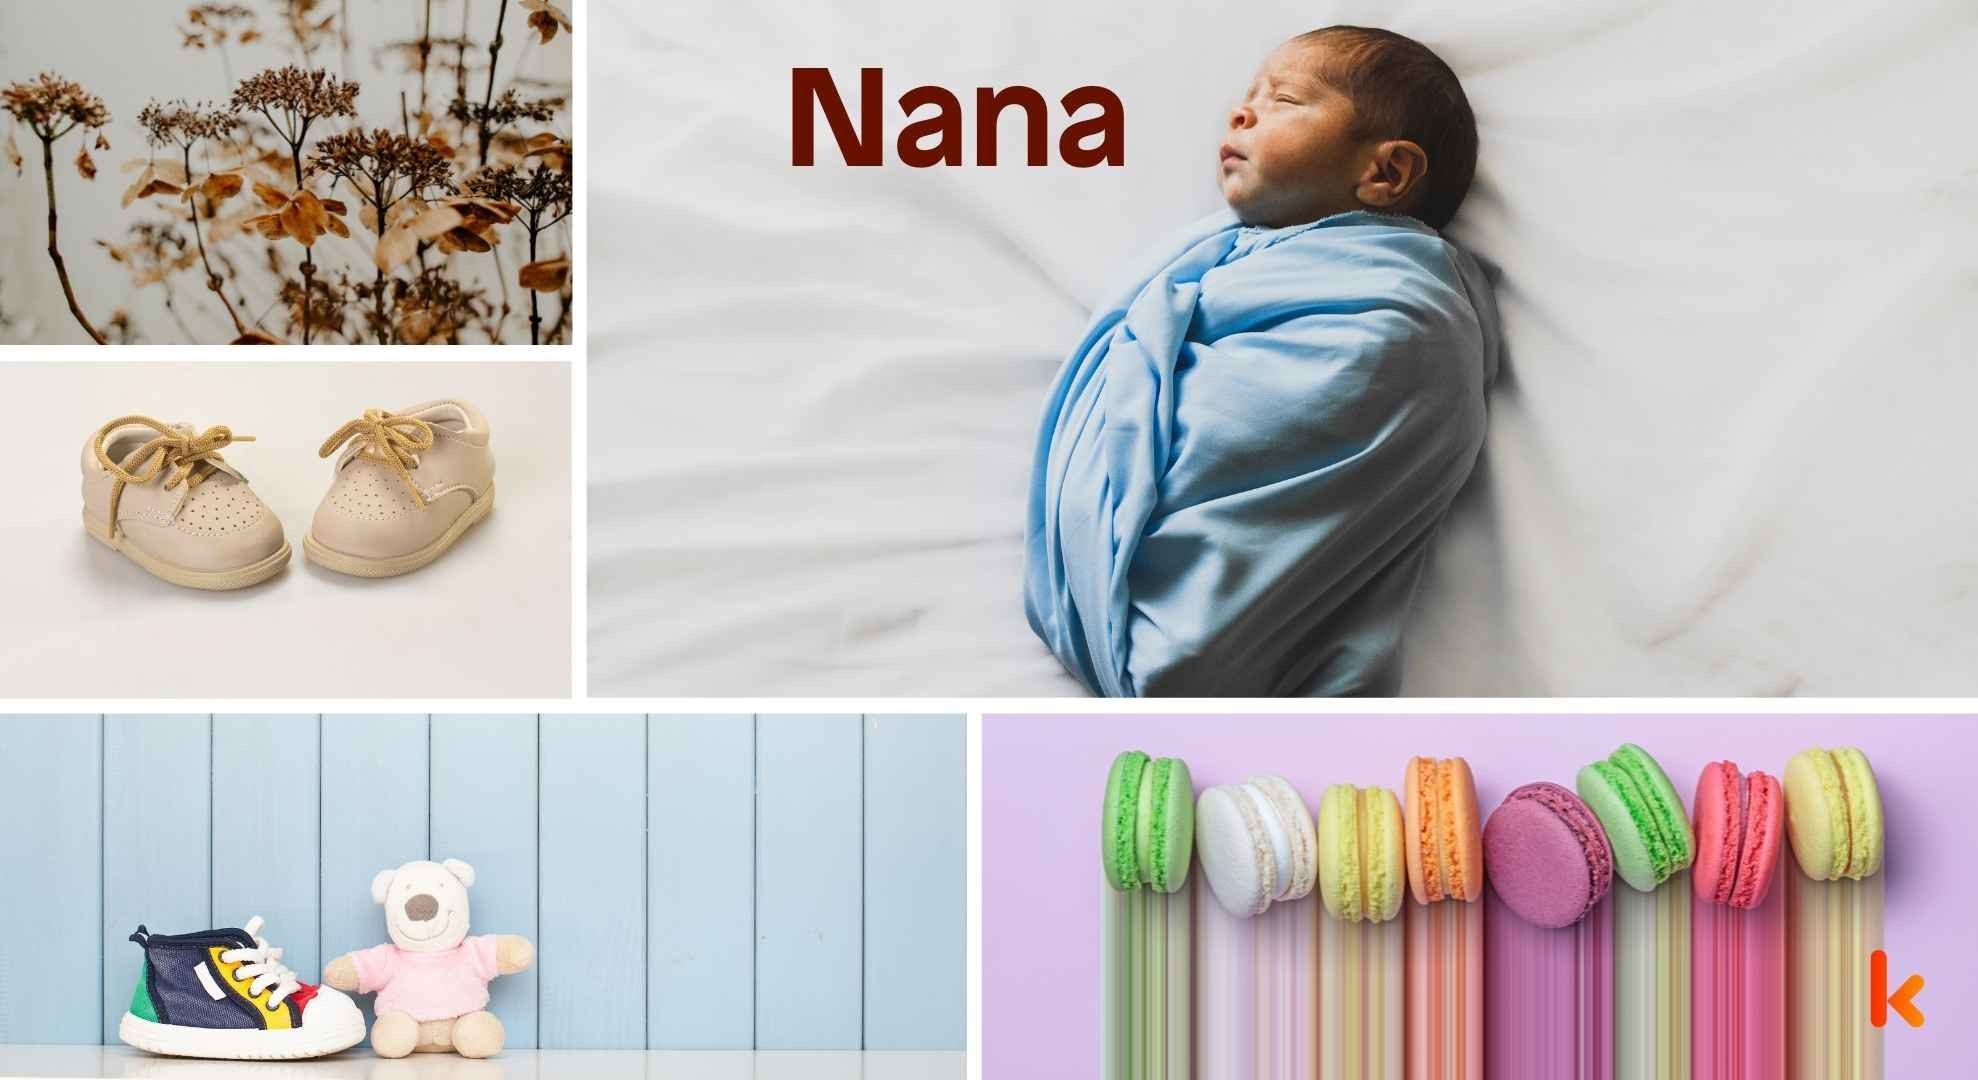 Meaning of the name Nana